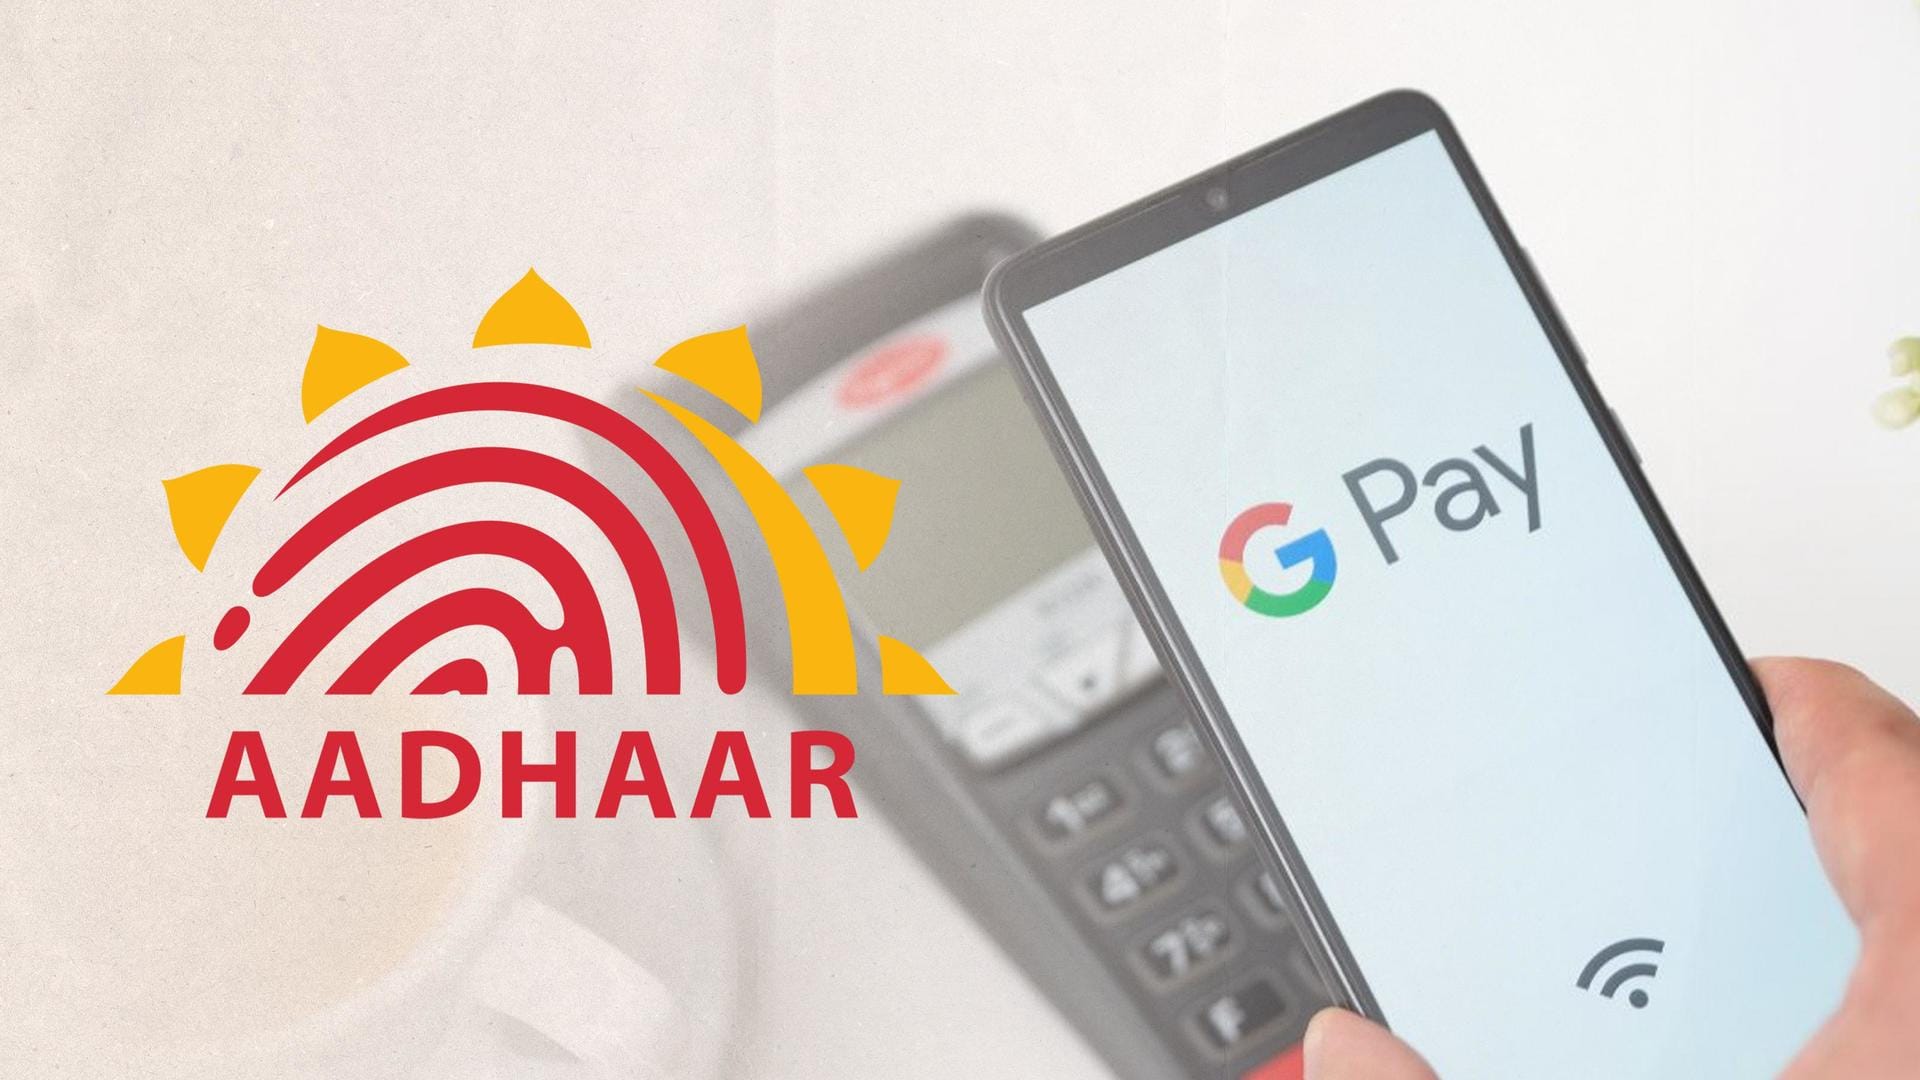 google pay enable aadhaar authentication for upi activation